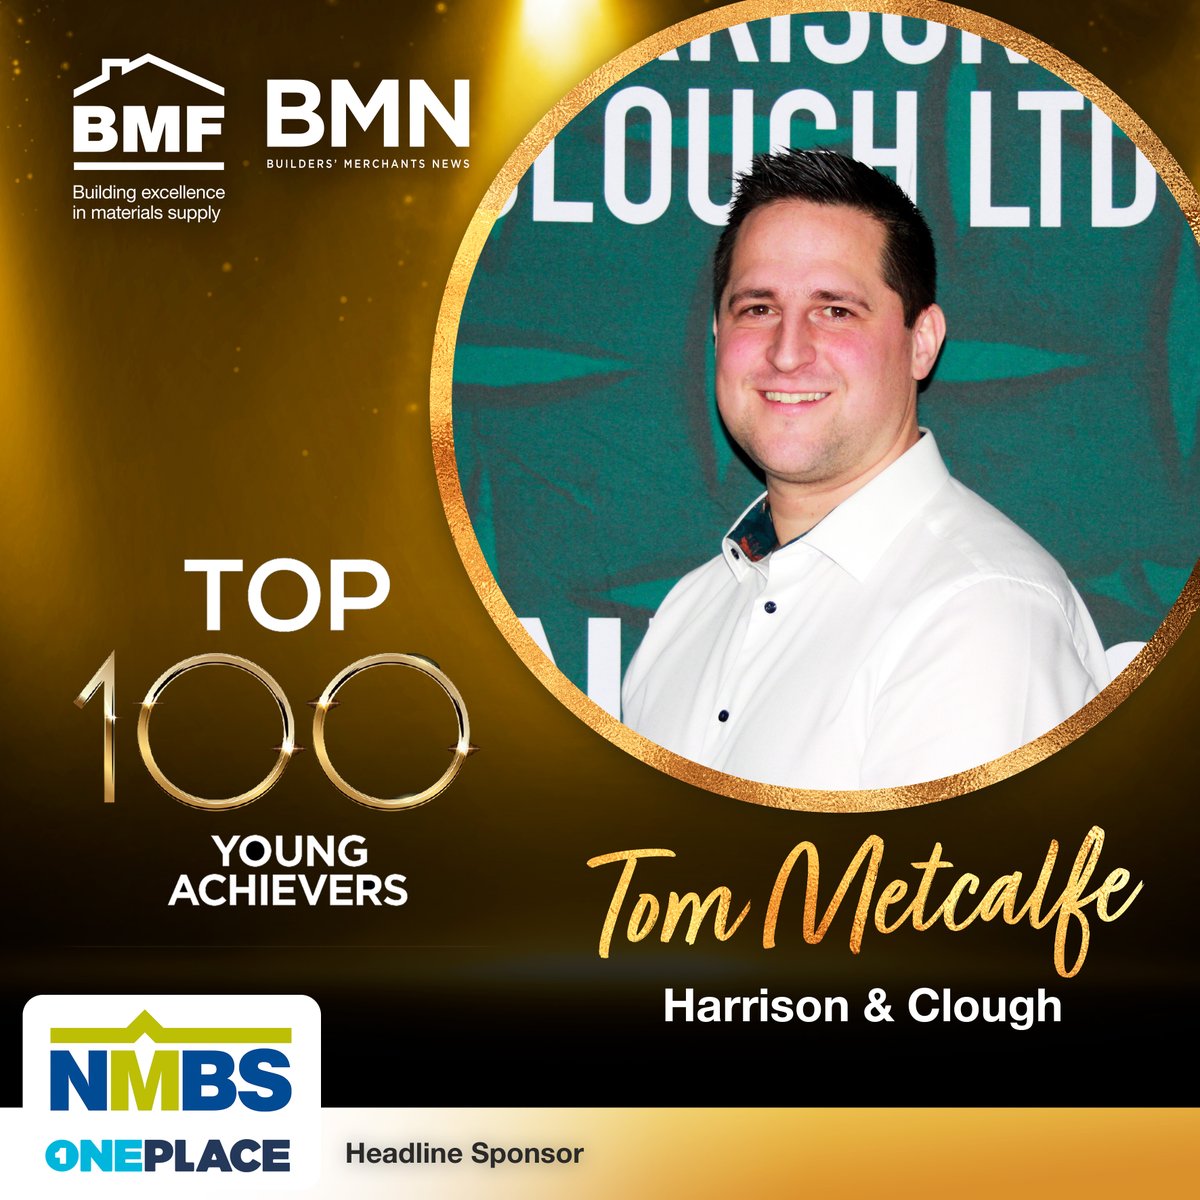 Up next for our BMF and @BMerchantsNews  Top 100 Young Achievers is Tom Metcalfe, Fixings Product Manager at @harclo57

Head sponsor, @NationalMerch 

#Top100YoungAchiever